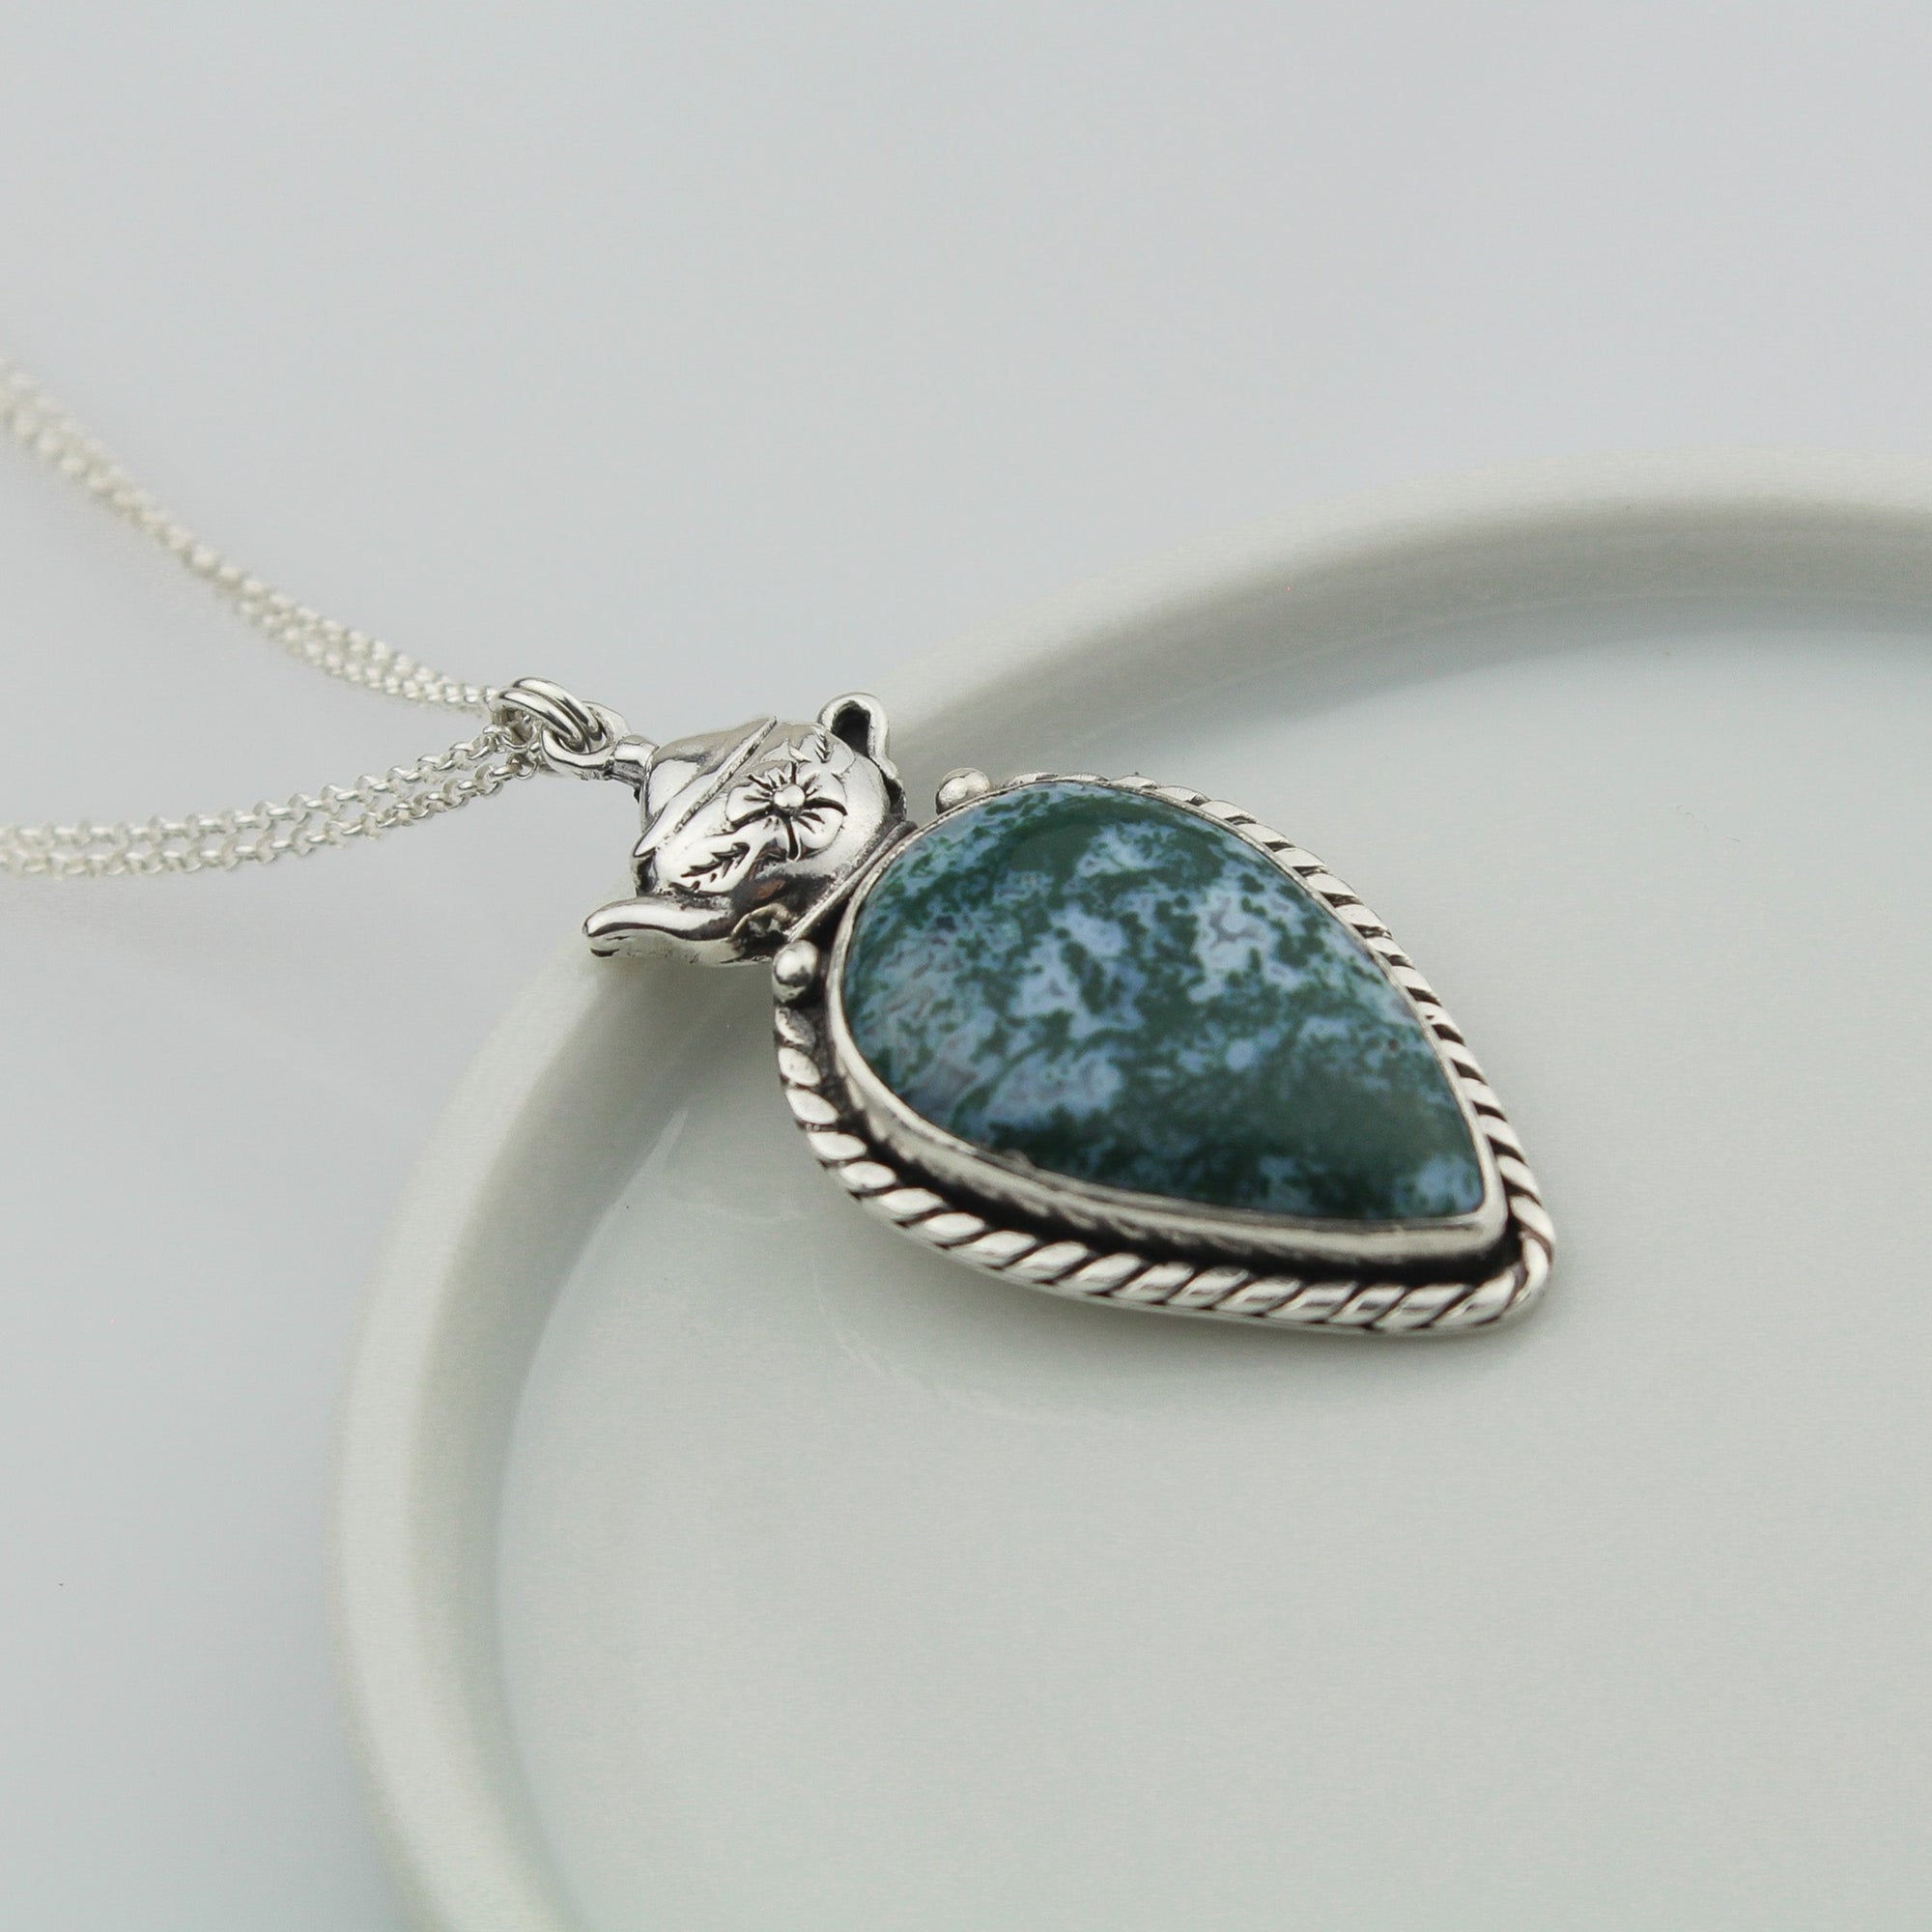 handmade necklace 925 sterling silver pendant, moss agate stone with teapot charm on top